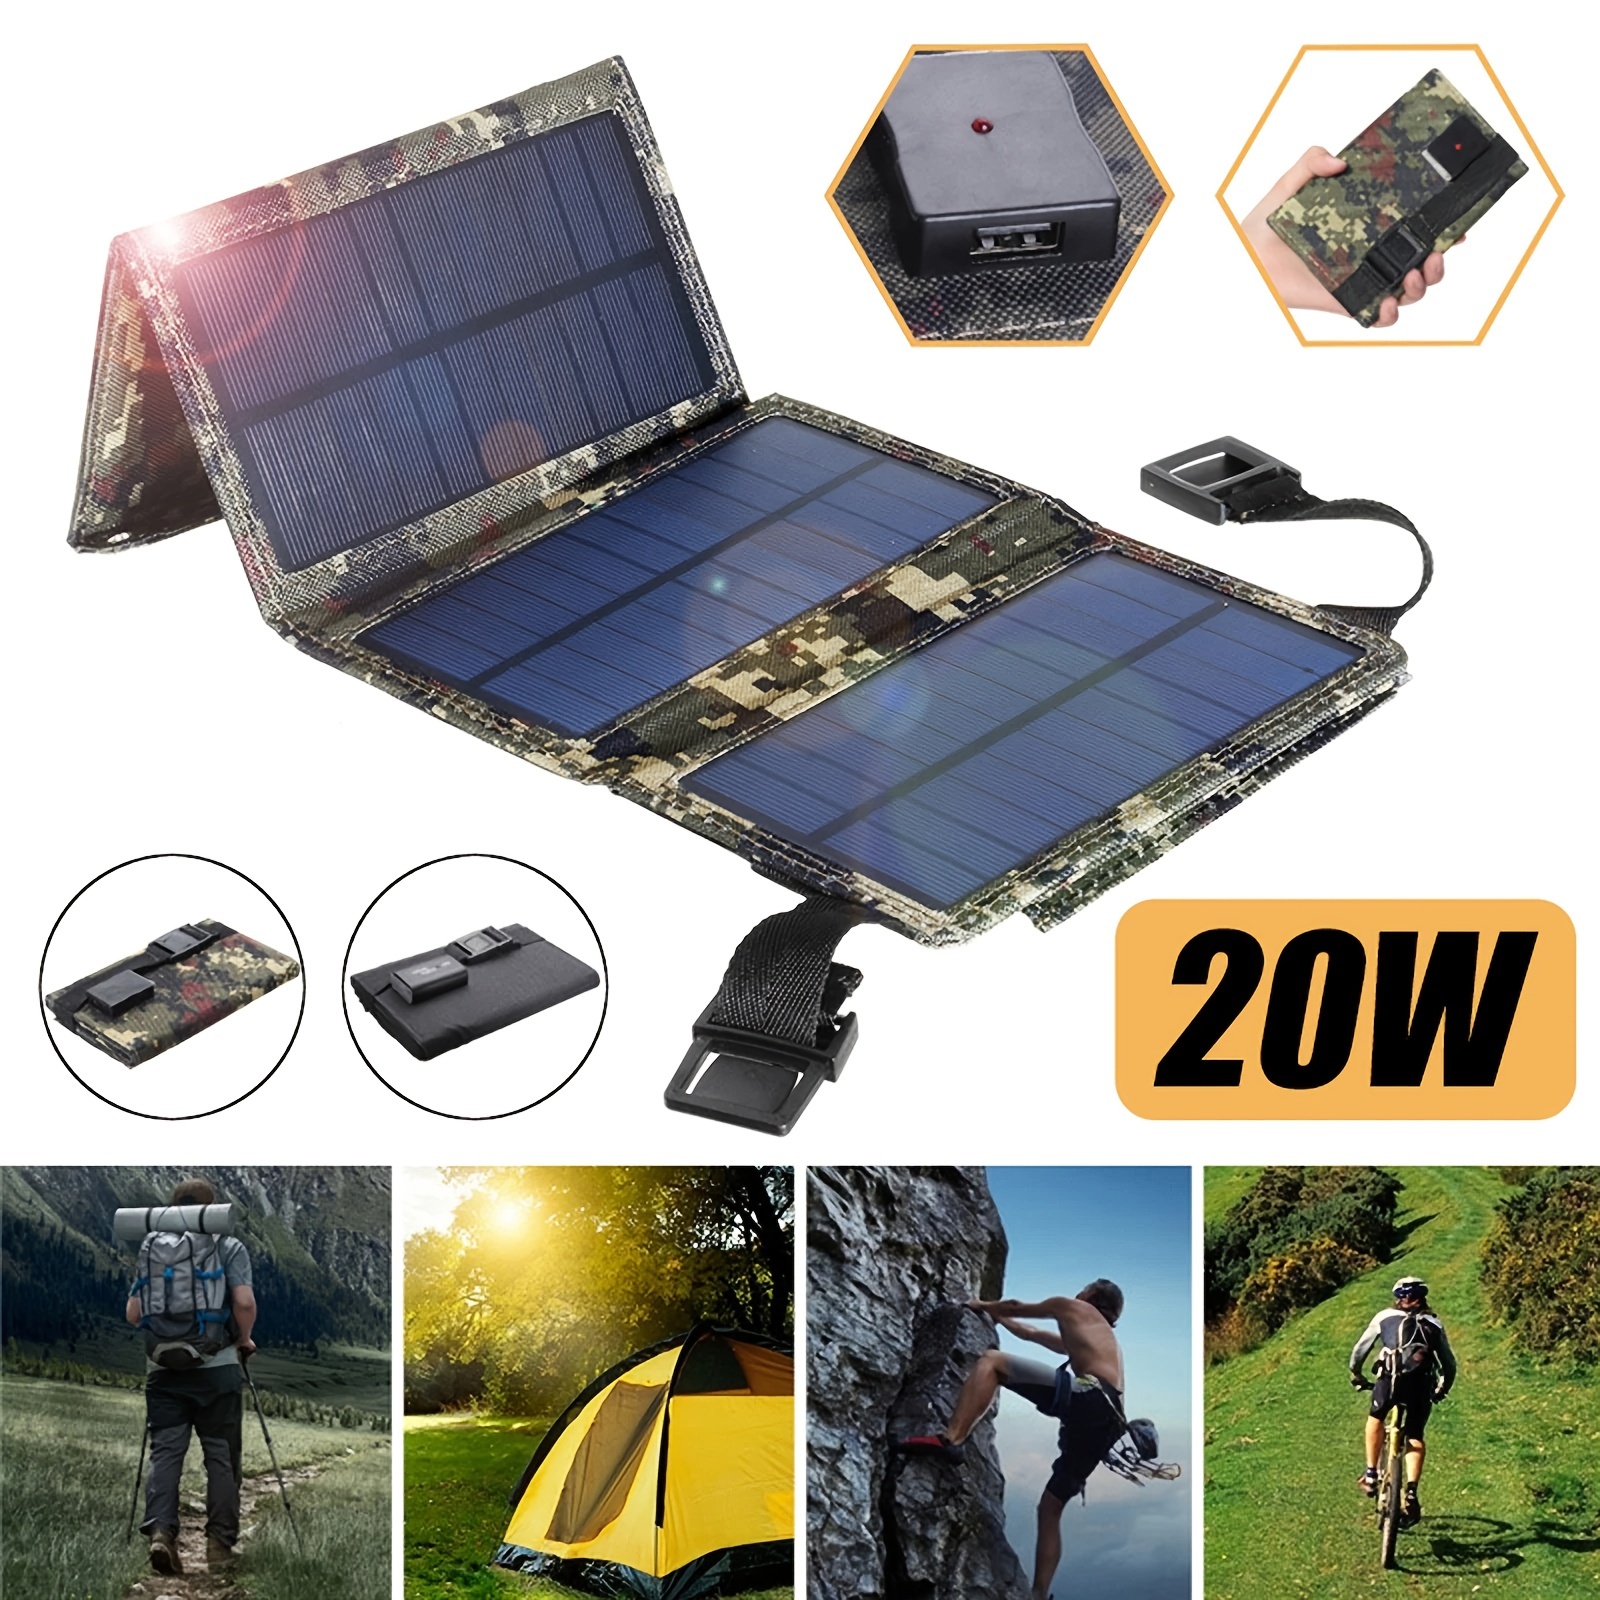 

20w Portable Solar Panel Foldable Power Bank Usb 5v20w Output Foldable Small Power Emergency Etfe Panels Ip67 Waterproof Camping Backpacking Hiking For Cell Phone Power Banks Flashlight Fans